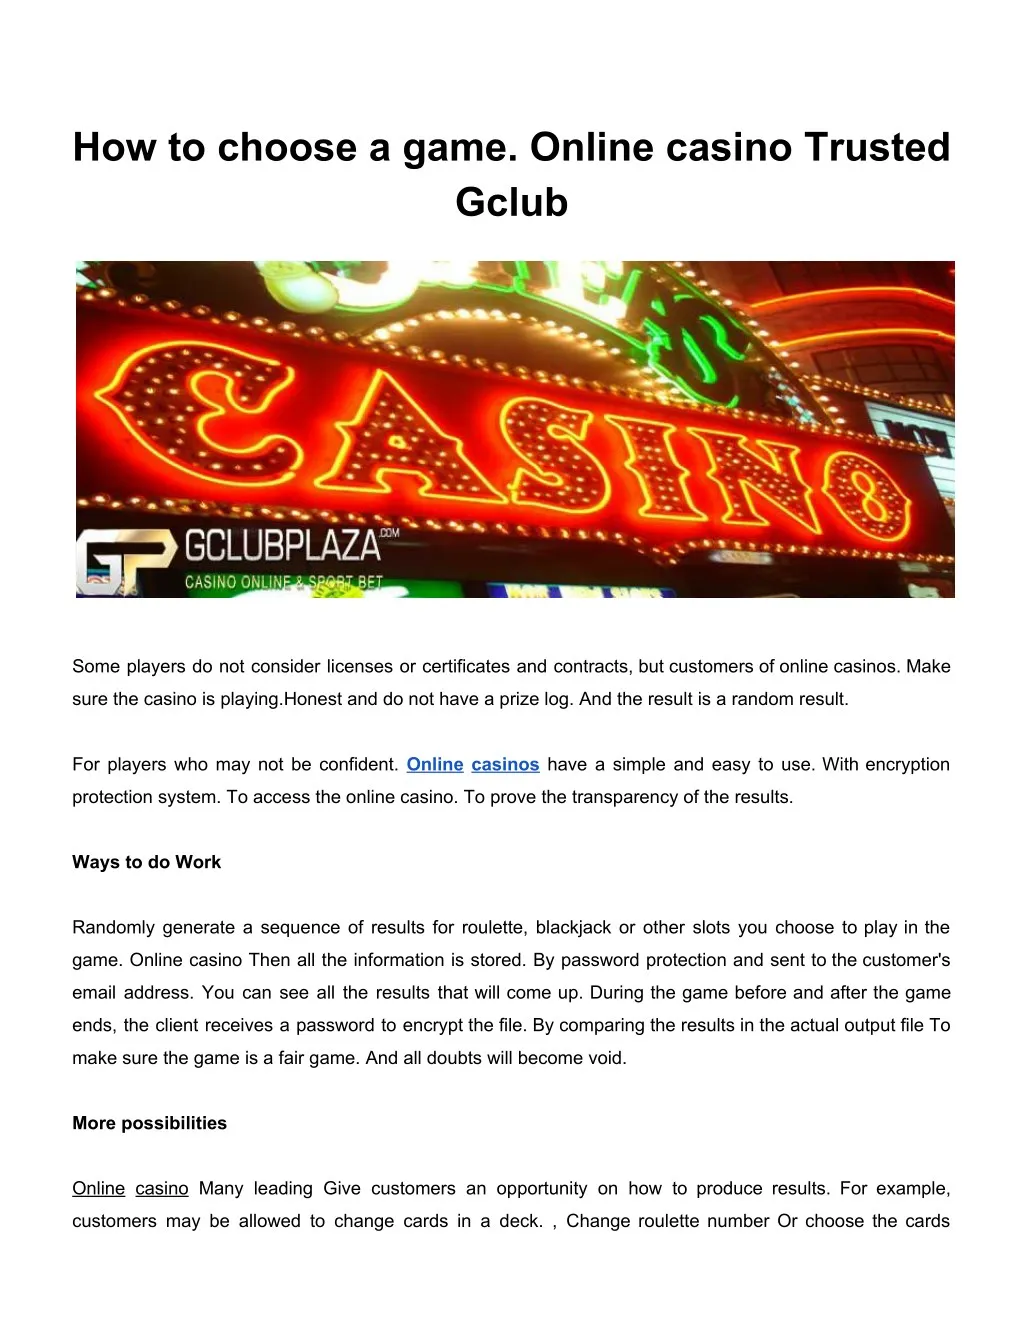 how to choose a game online casino trusted gclub